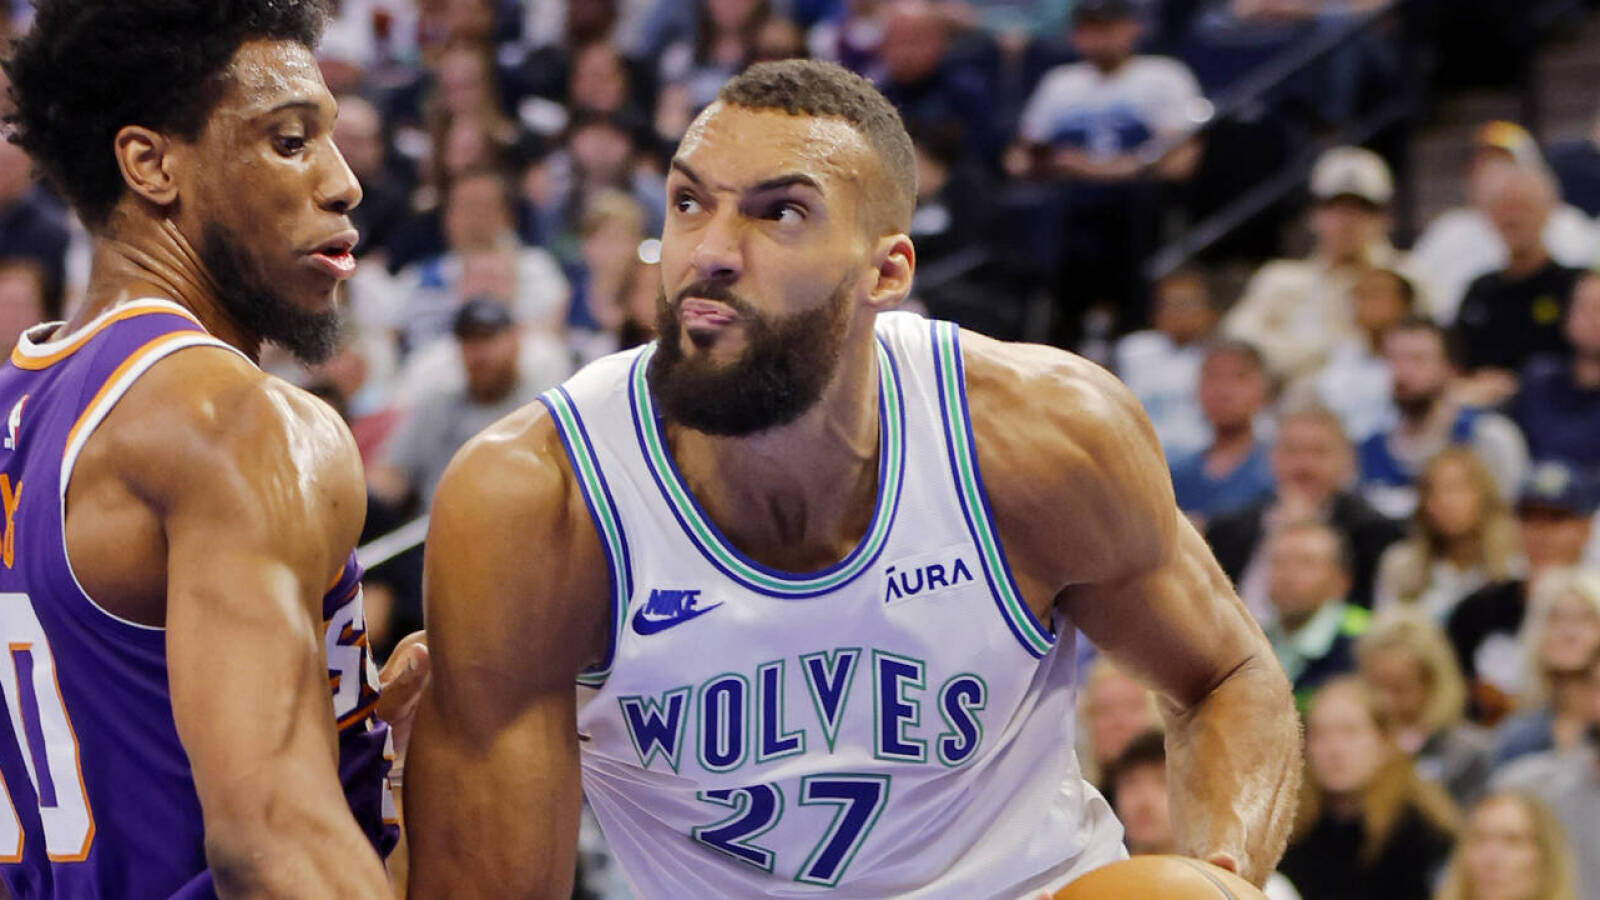 Timberwolves star voted most overrated player in the NBA